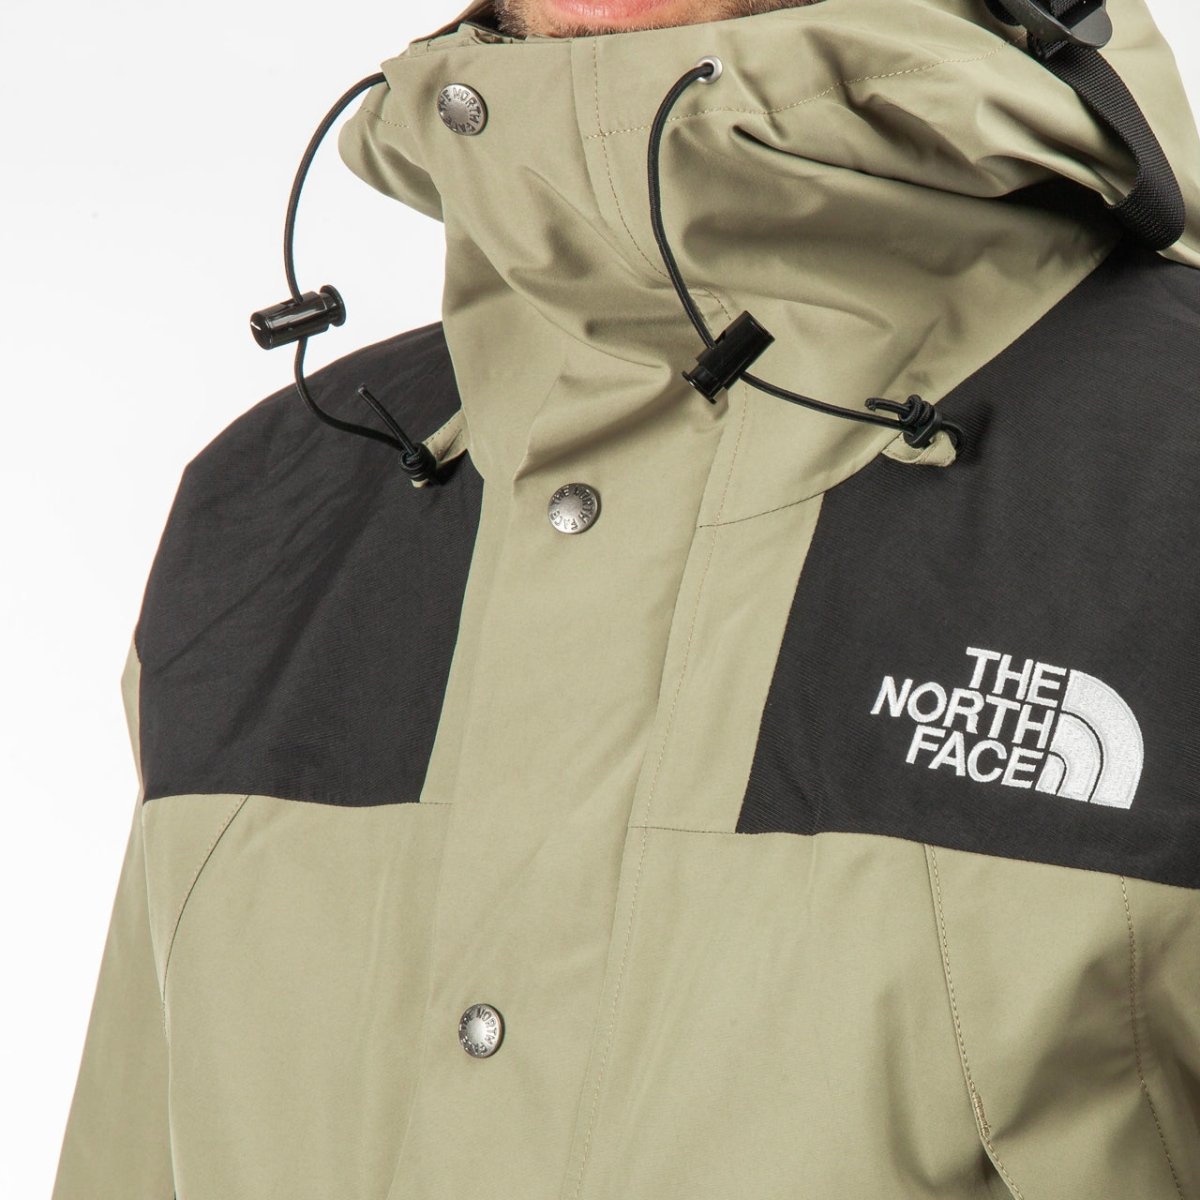 The North Face M 1990 Mountain Jacket GTX (Olive)  - Allike Store